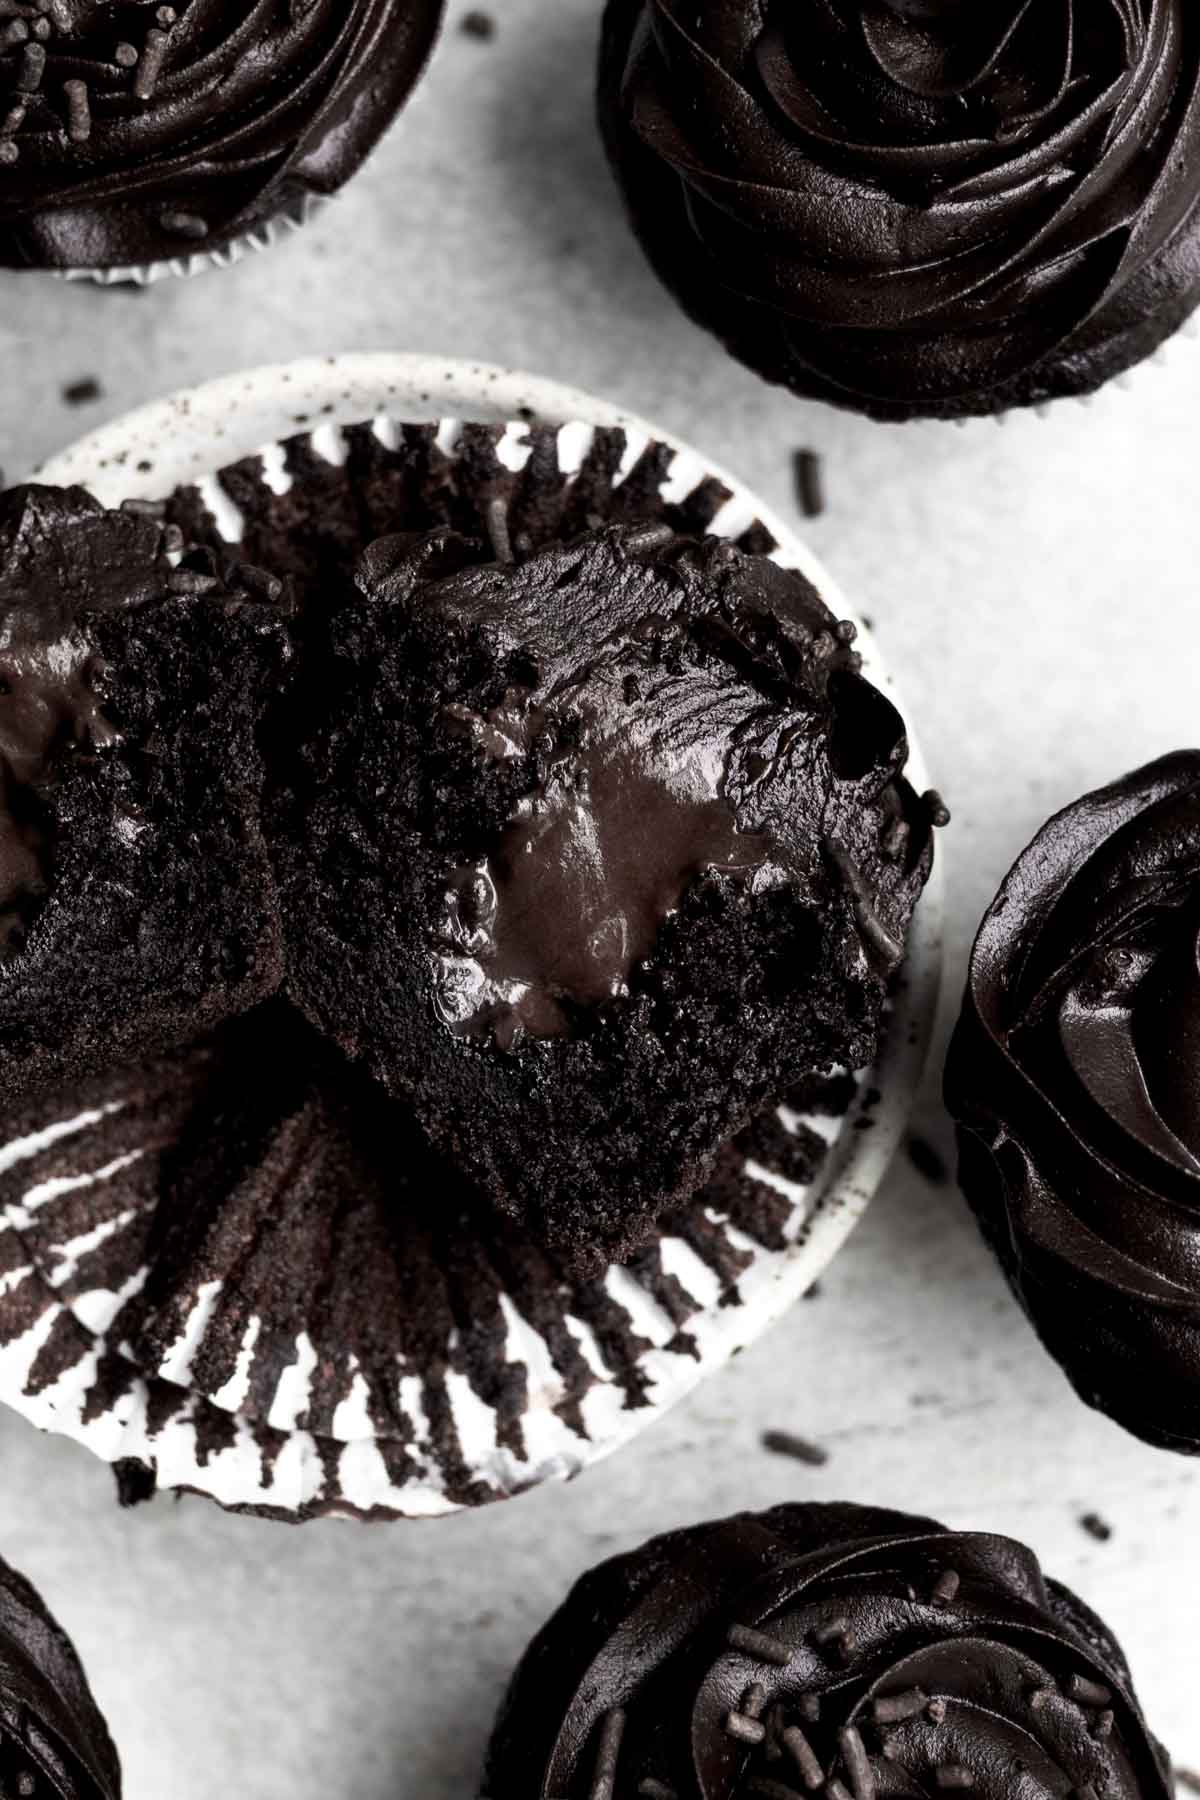 A sliced cupcake with chocolate ganache filling.